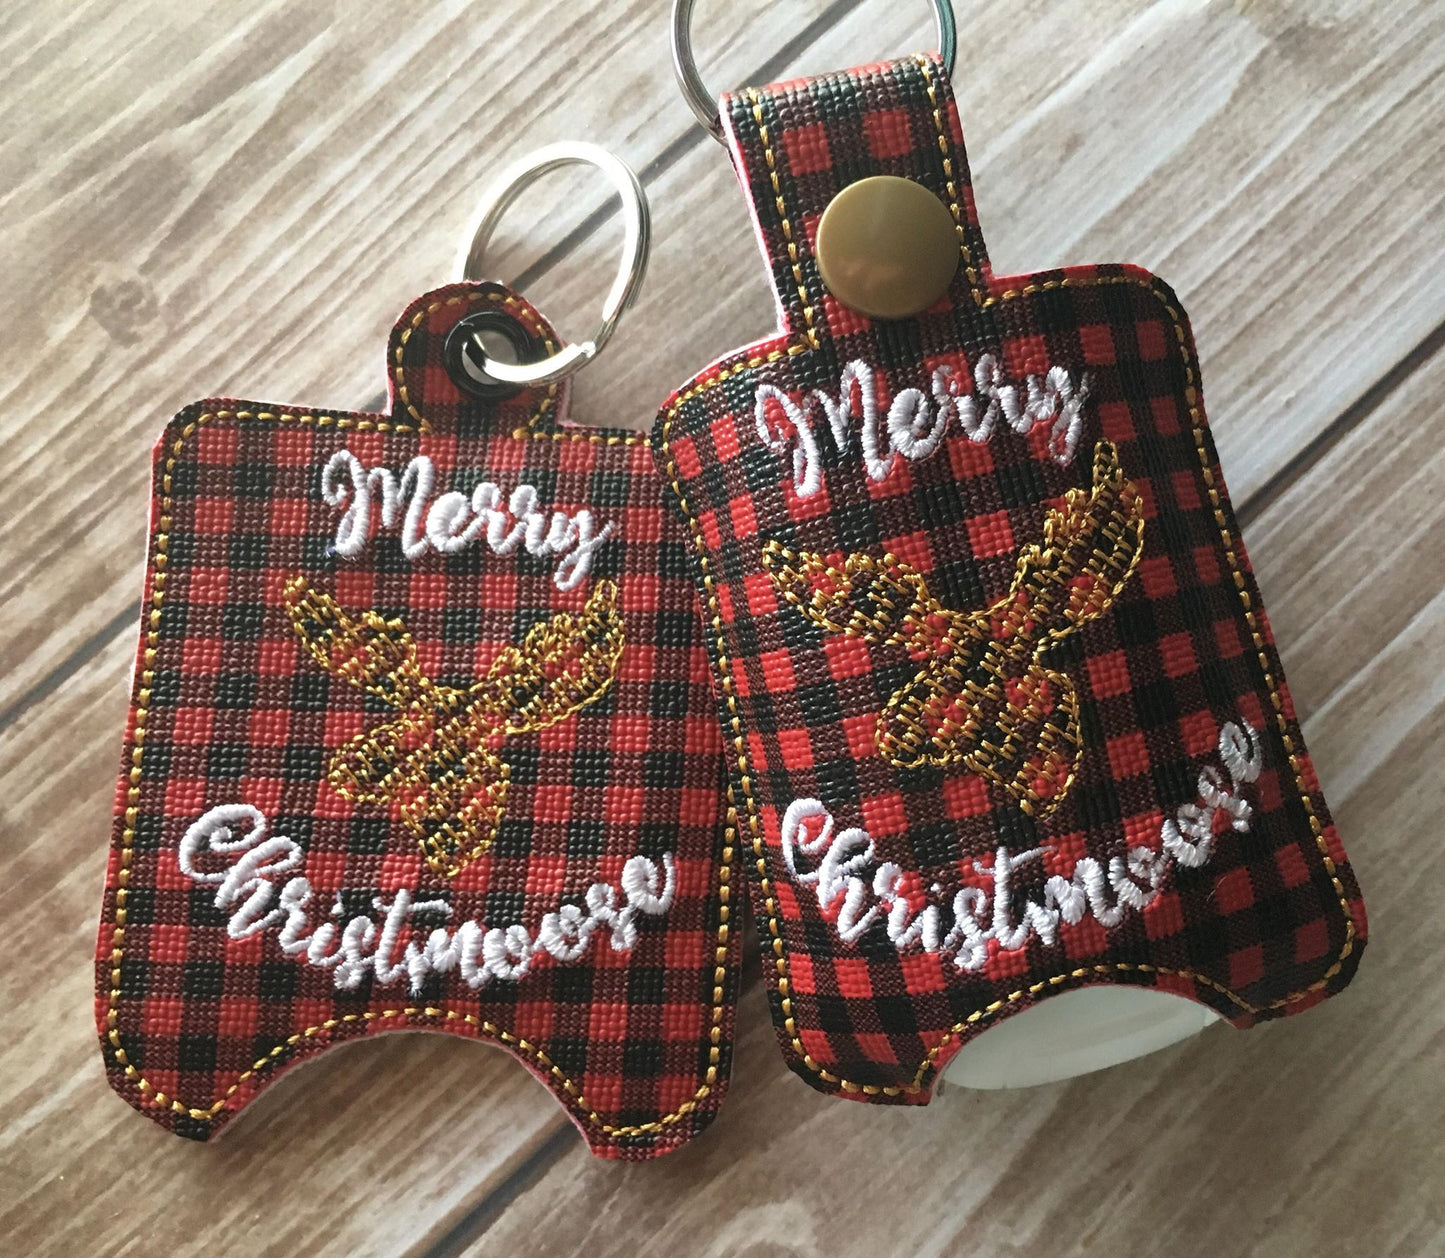 Rustic Merry Christmoose Sanitizer Holders - Embroidery Design - DIGITAL Embroidery DESIGN